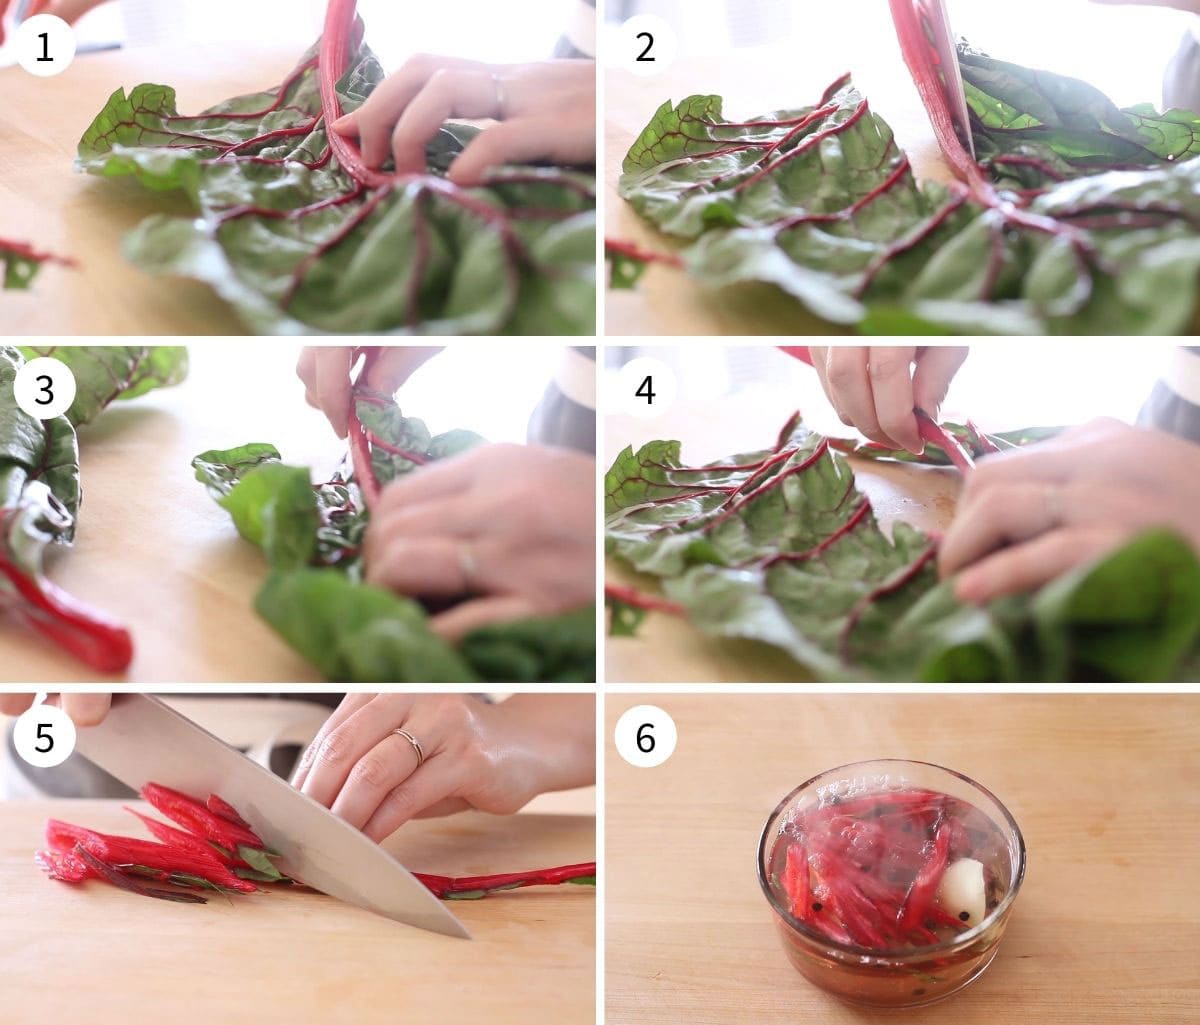 Step by step photos on how to de-stem swiss chard and slice the stems on a bias to prepare for quick pickling.